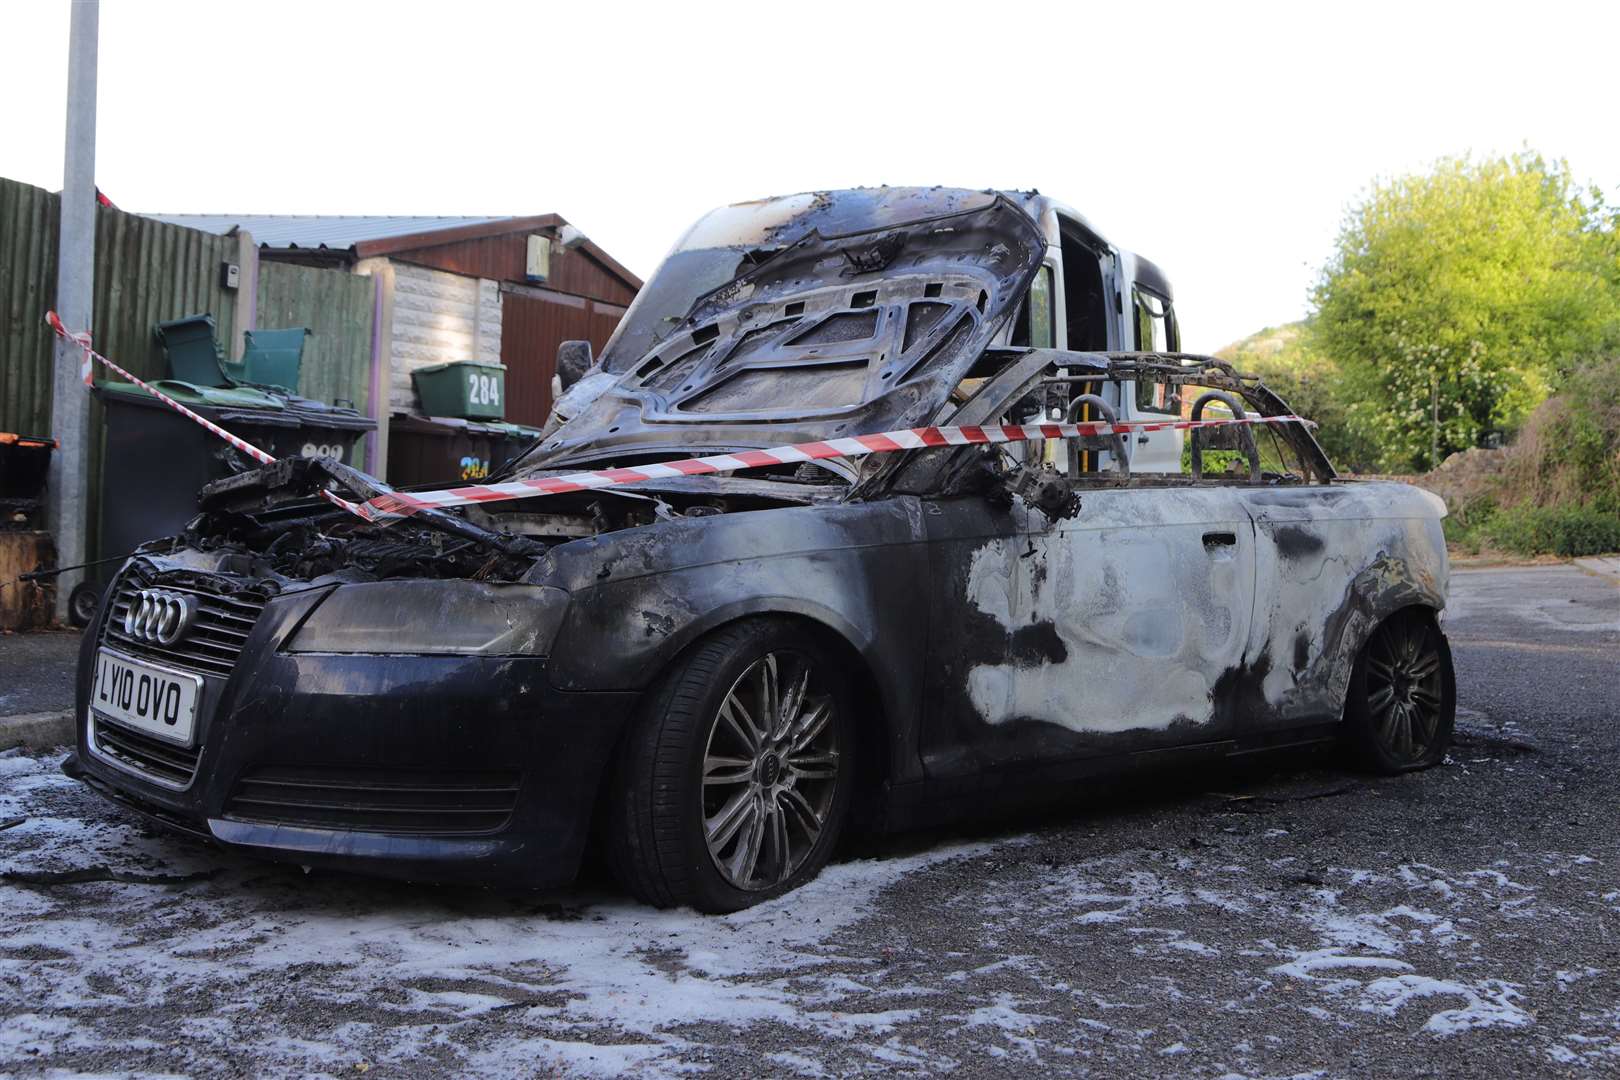 The burnt wreckage of a stolen Audi TT which was set alight in Burham. Image by Keith Thompson